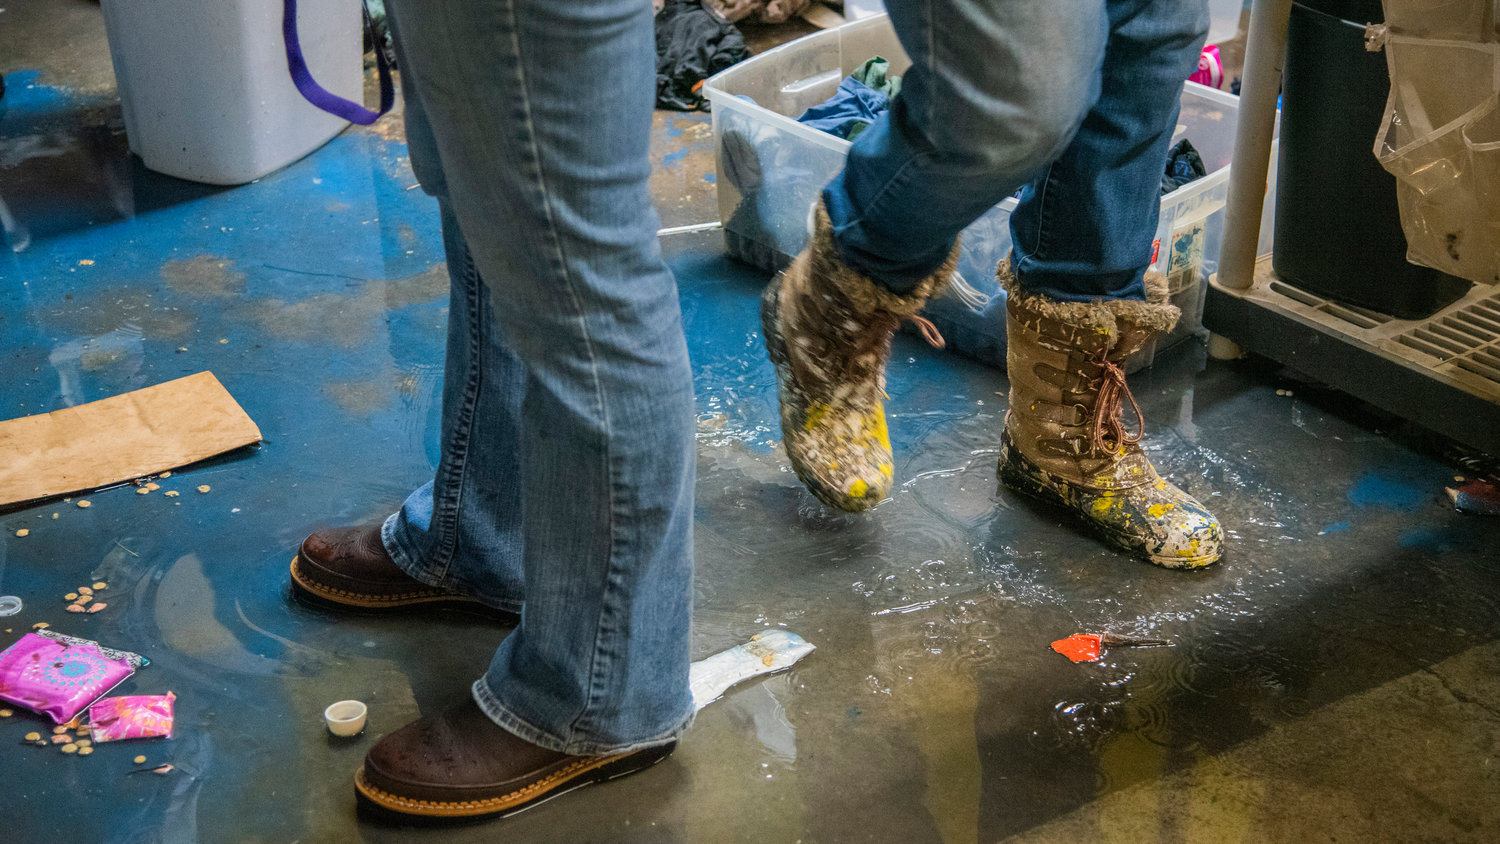 Volunteers walk through water and debris that remains inside Lewis County Gospel Mission in Chehalis after the building experienced flooding.